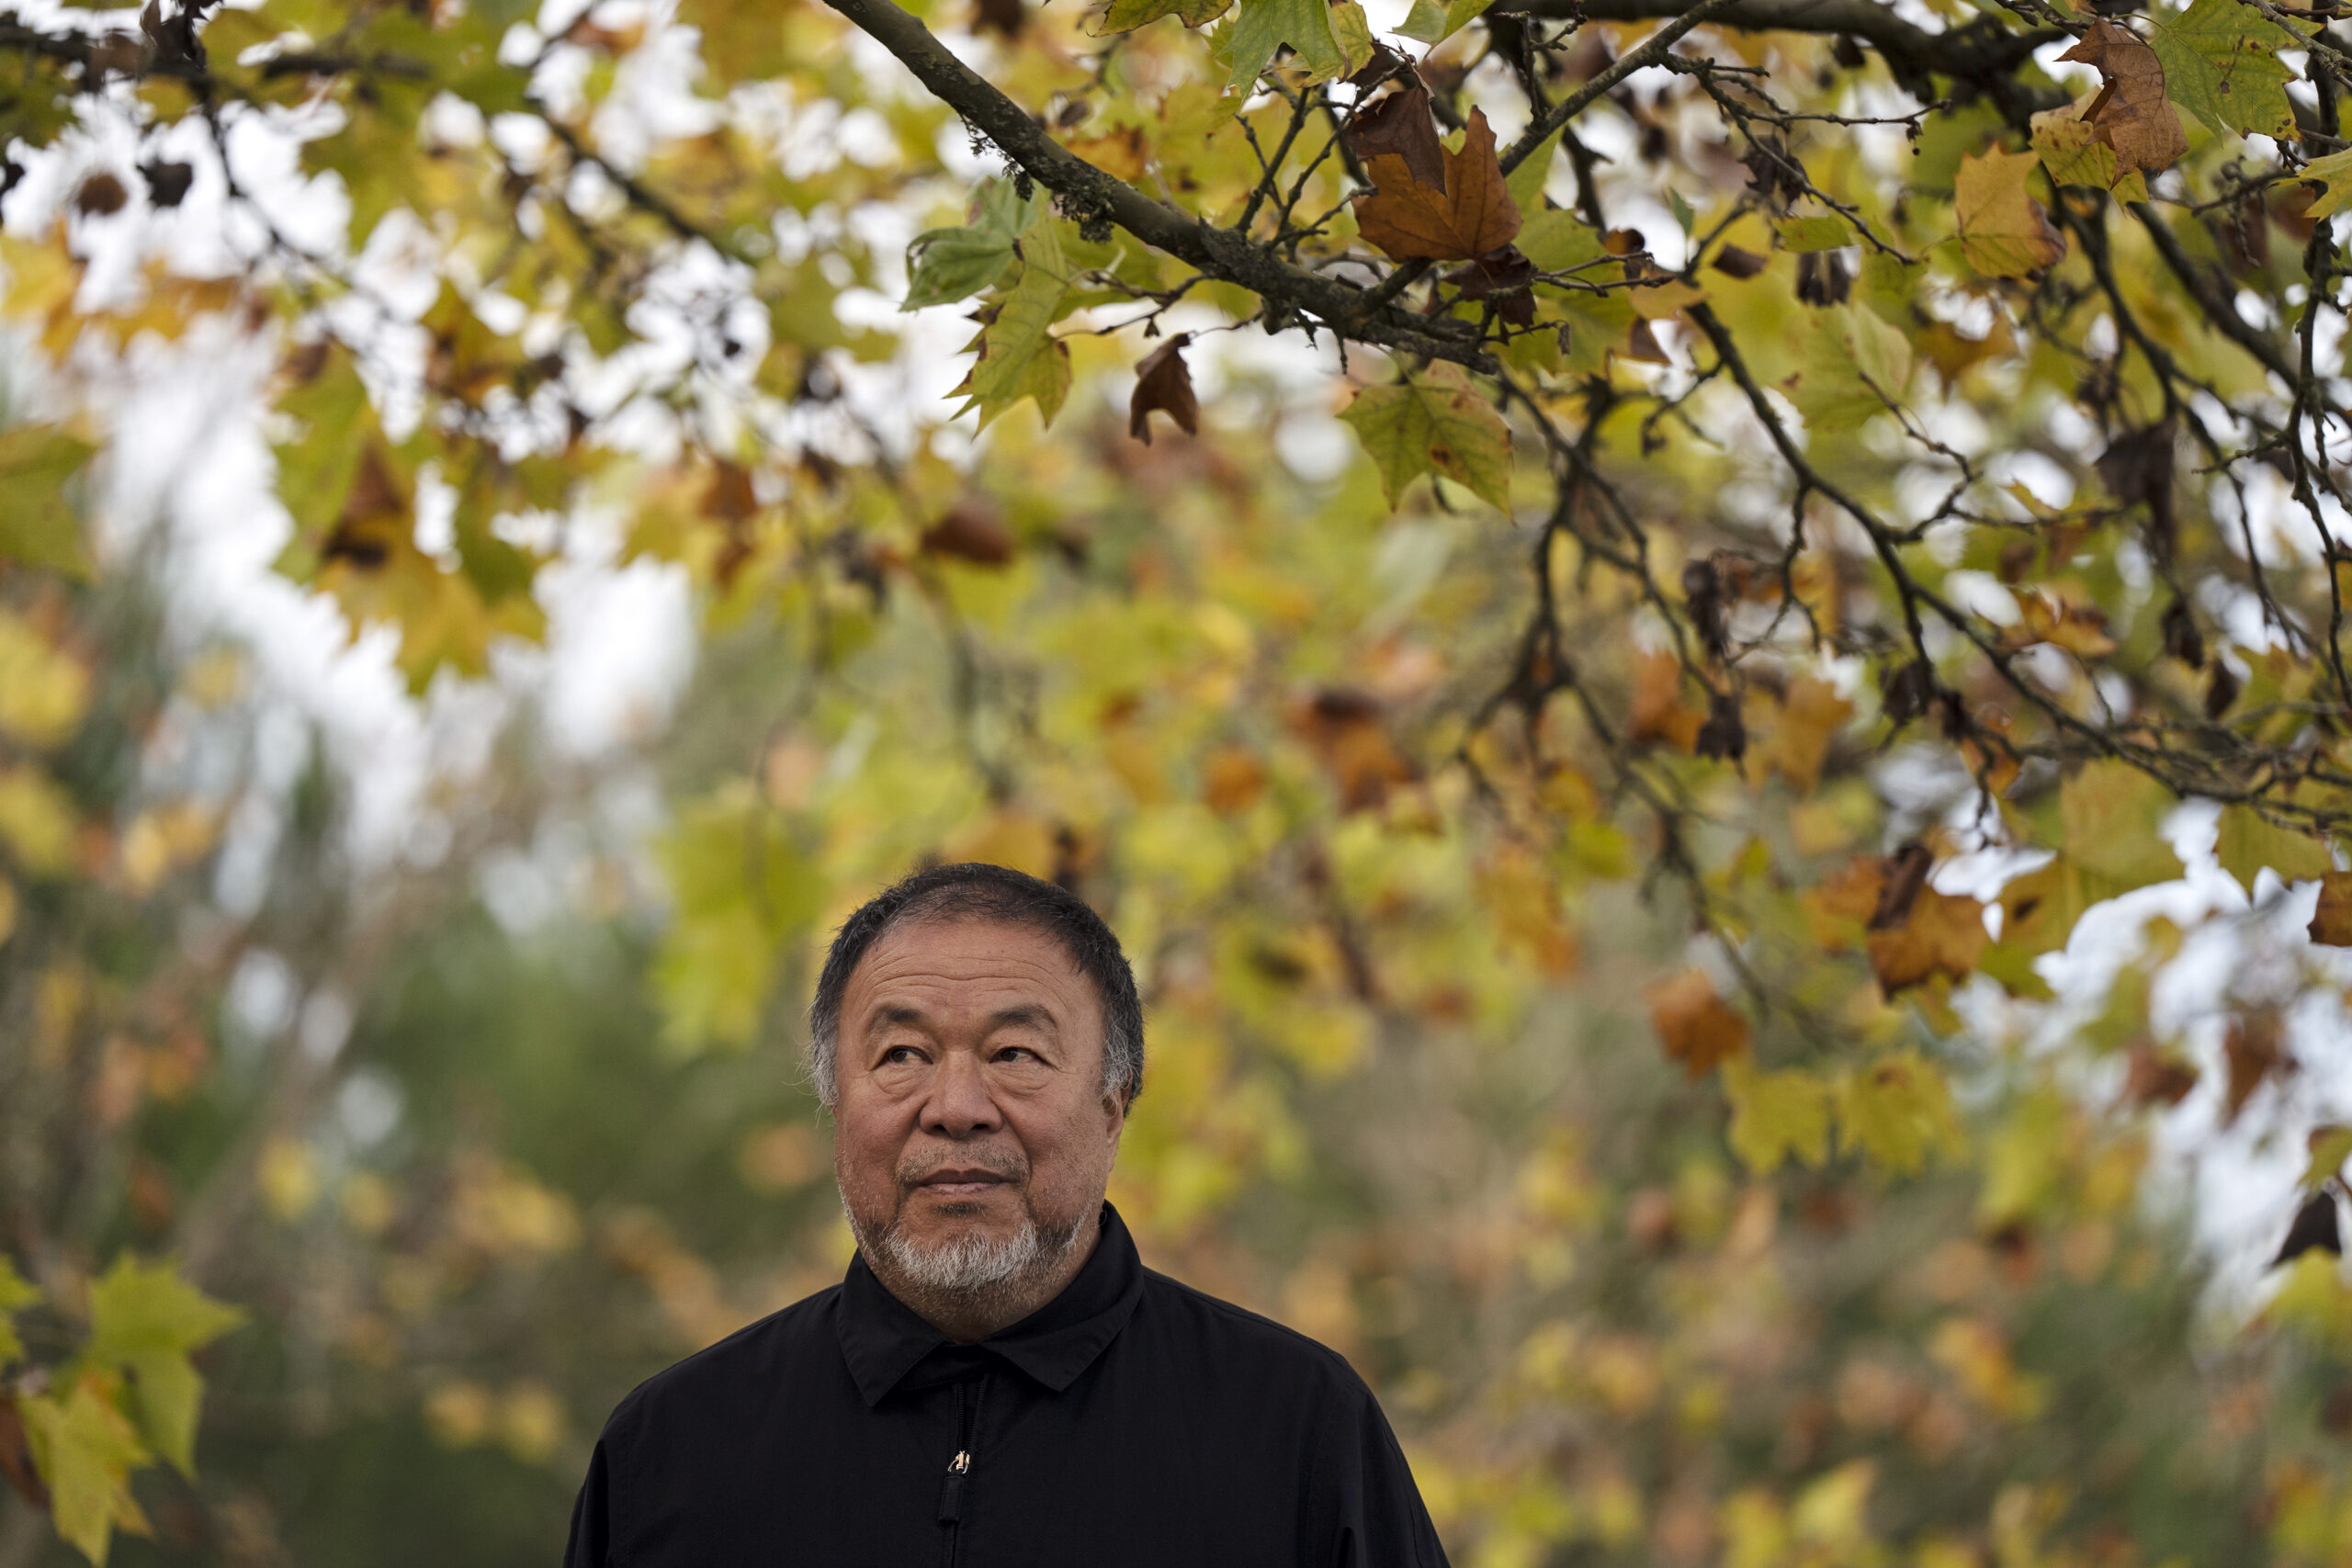 Dissident Chinese artist and activist Ai Weiwei poses for a photo in the garden of his country house in Montemor-o-Novo, Portugal, Tuesday, Dec. 6, 2022. Ai is taking heart from recent public protests in China over the authorities' strict COVID-19 policy, but he doesn't see them bringing about any significant political change. (Foto: AP Photo/Ana Brigida.)